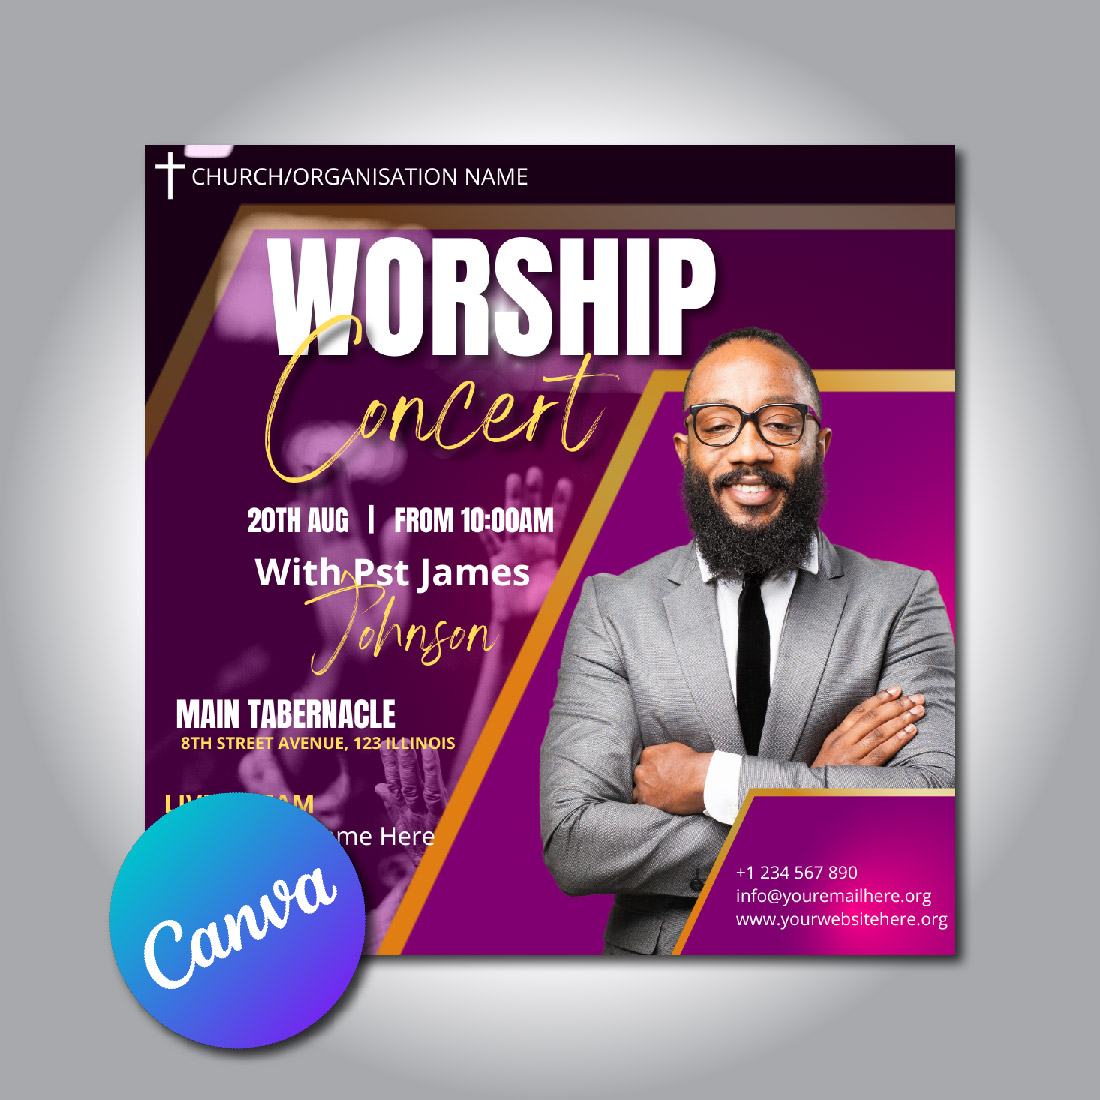 CHURCH FLYER TEMPLATE cover image.